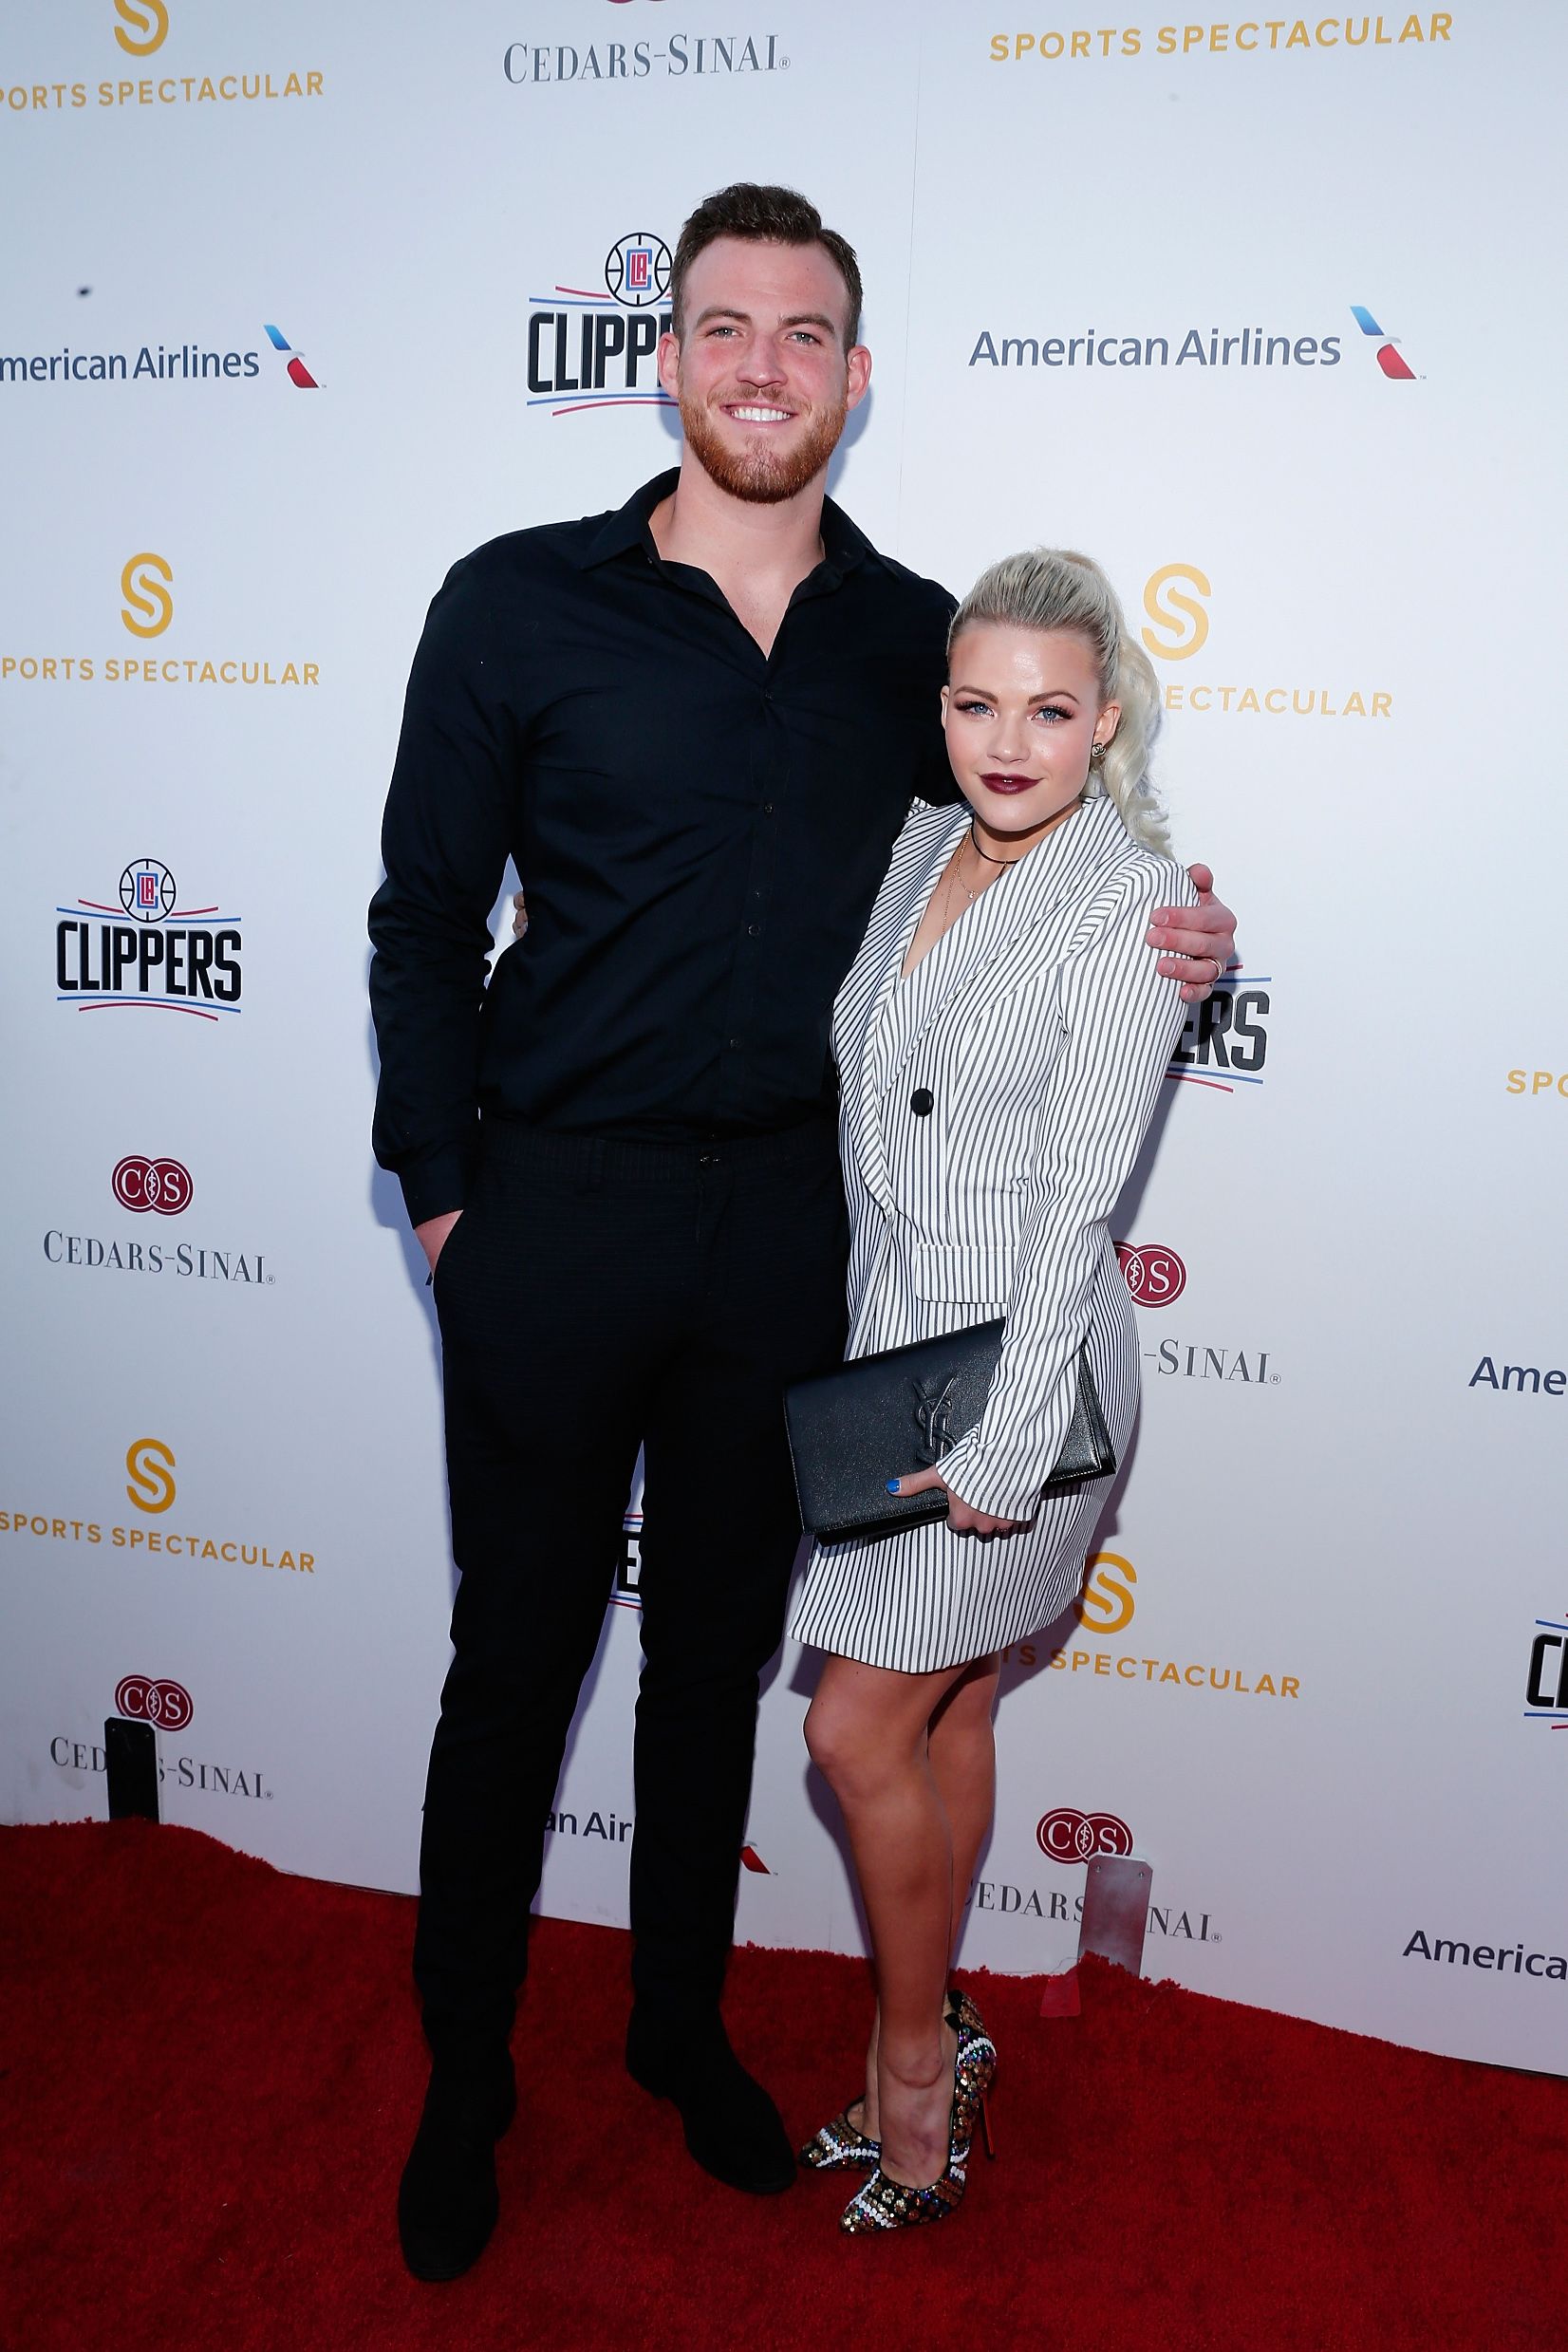 Carson McAllister and Witney Carson at the Cedars-Sinai Sports Spectacular on March 25, 2016, in Los Angeles, California | Photo: Rich Polk/Getty Images